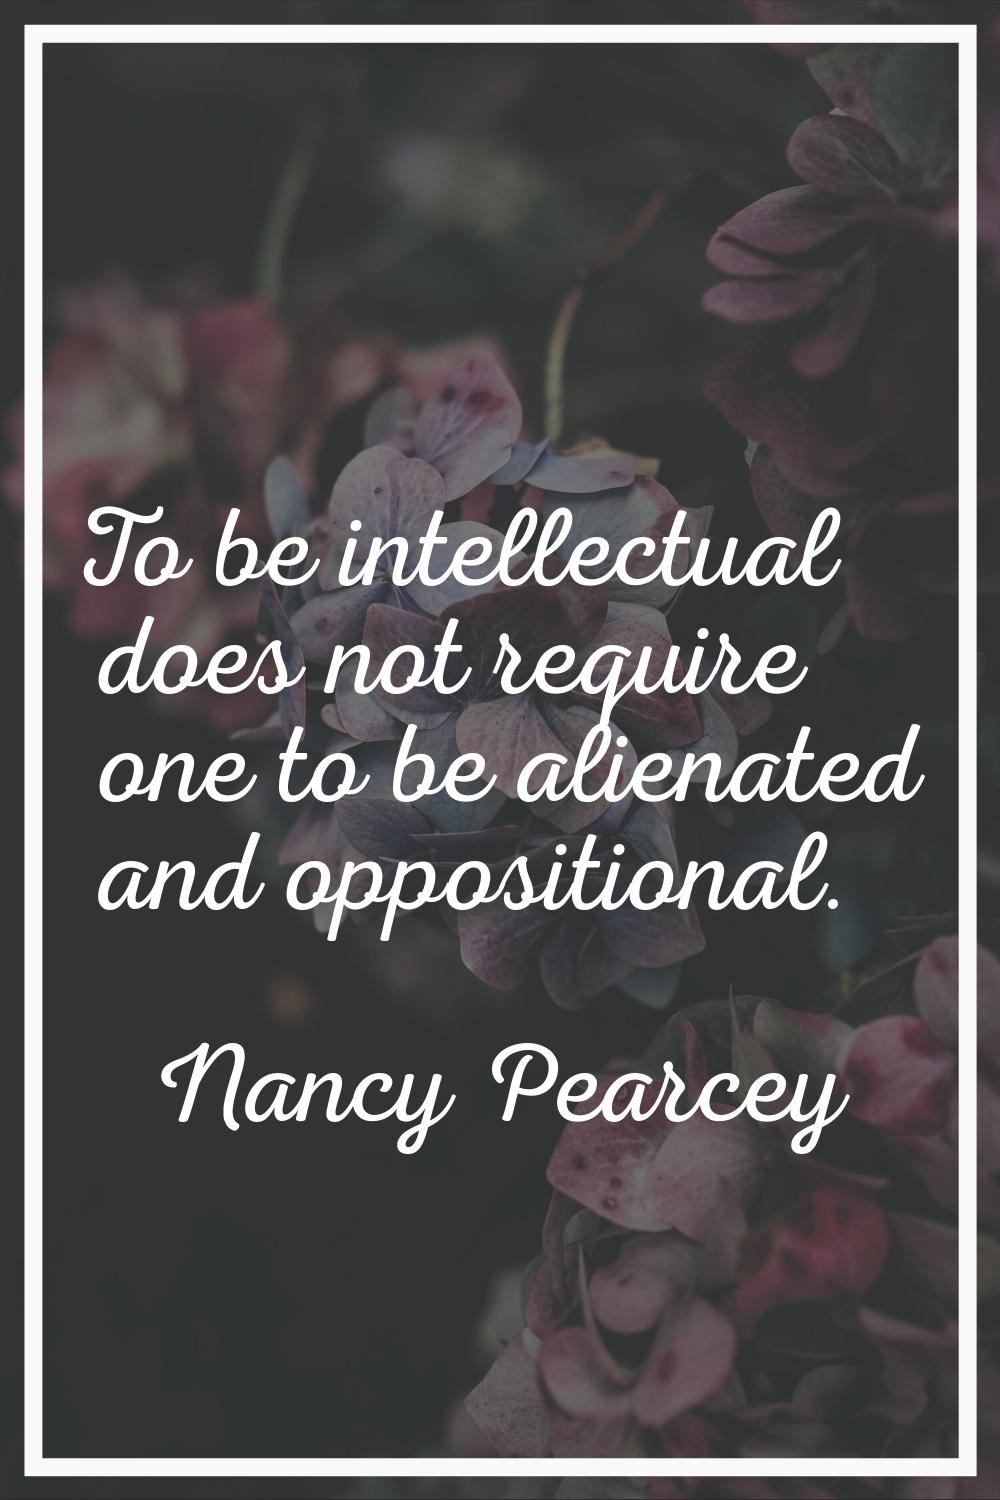 To be intellectual does not require one to be alienated and oppositional.